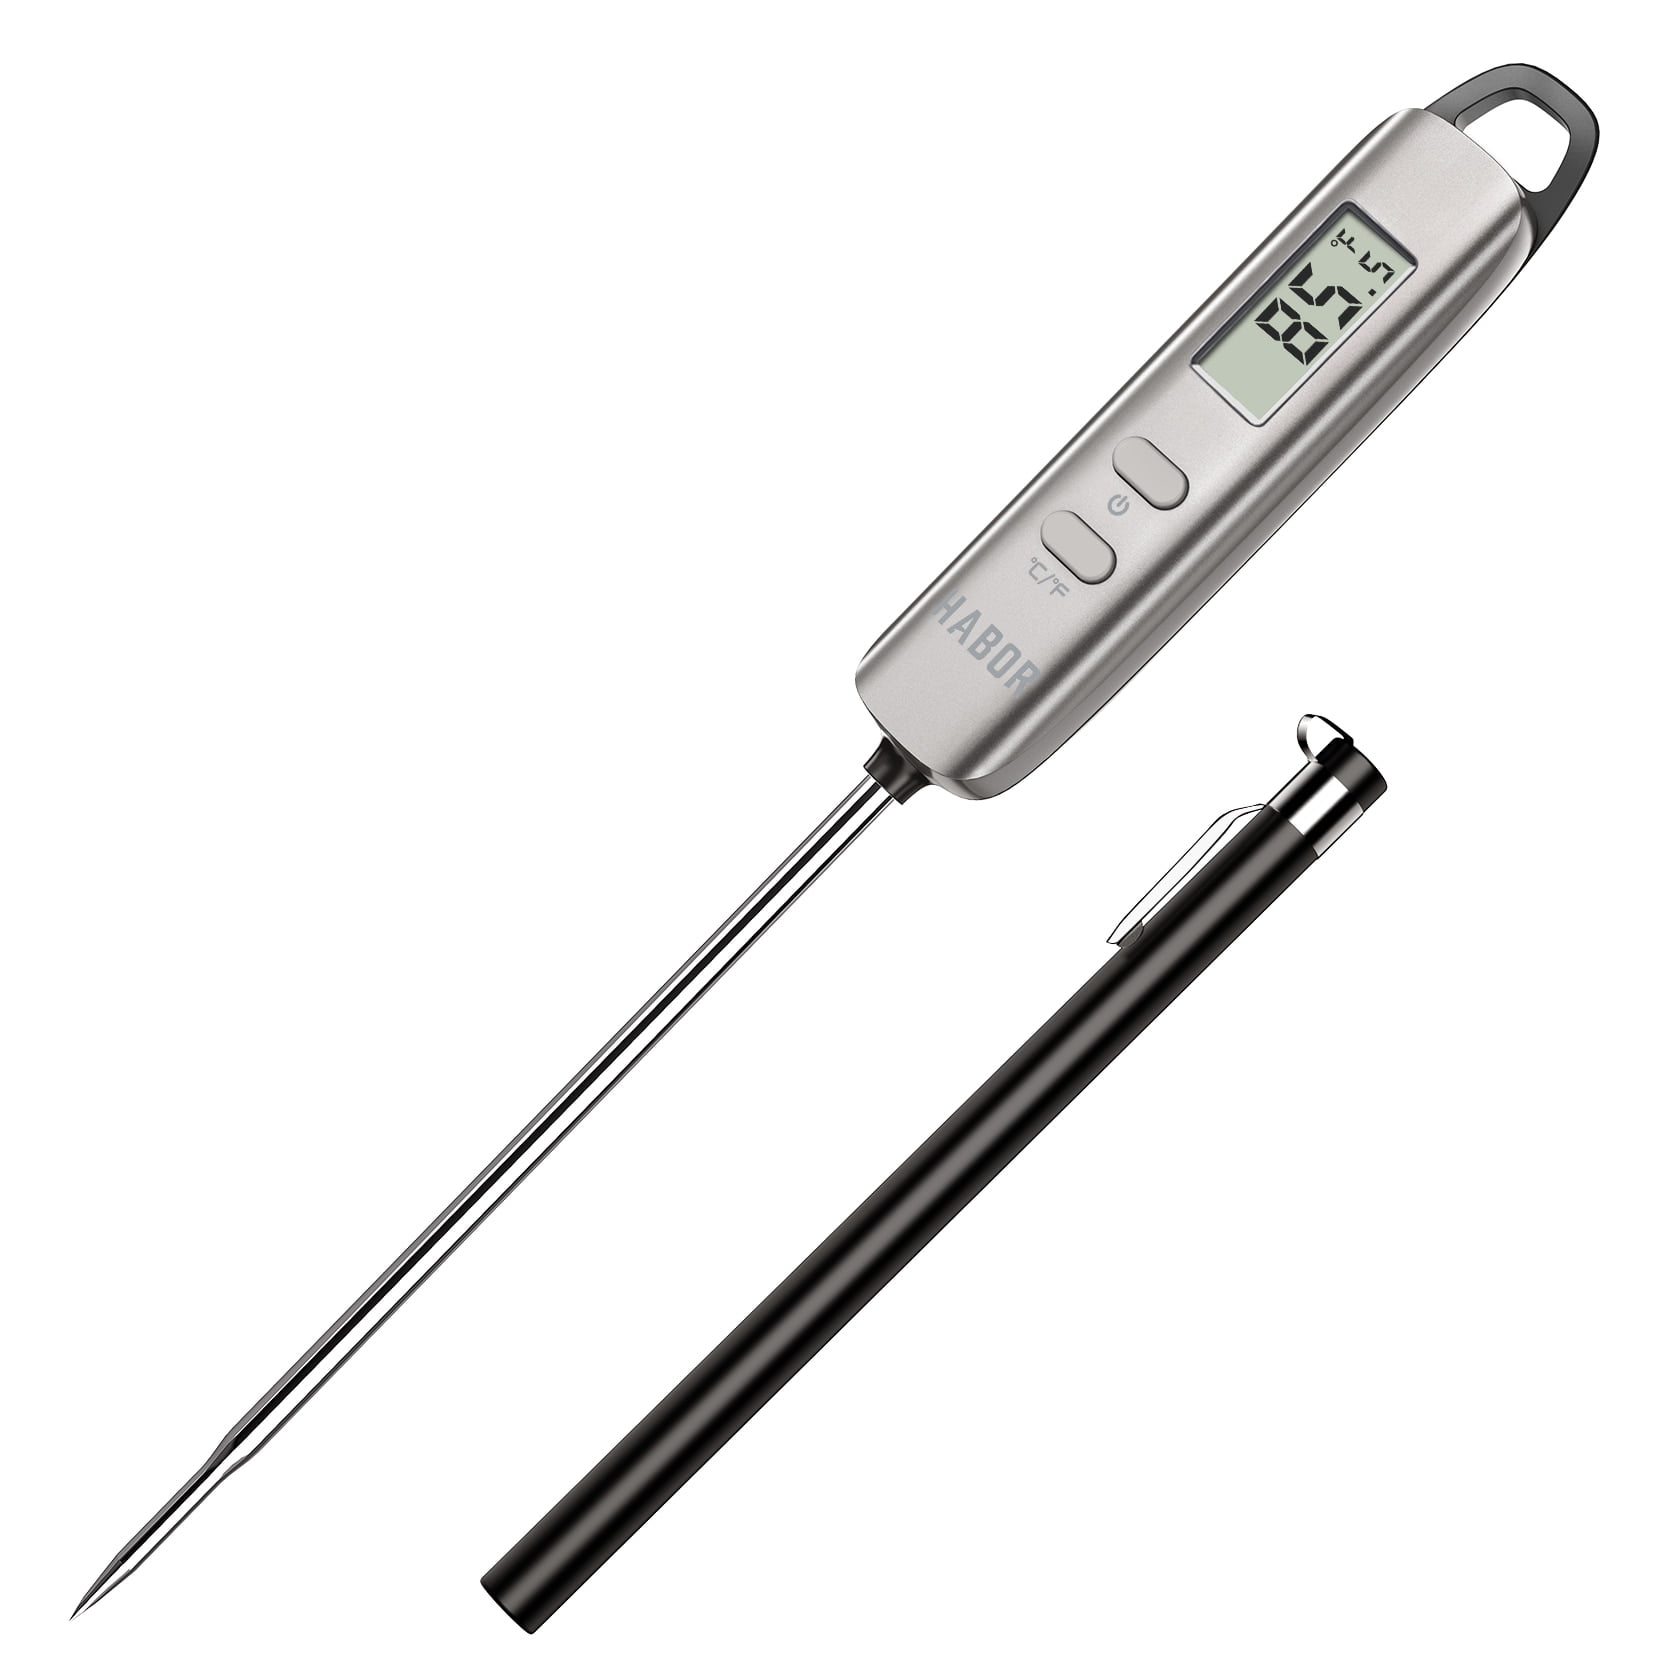 Habor Instant Read Meat Thermometer for Kitchen Food, Waterproof Magnet  Digital Food Thermometer with Backlight LCD, 4.6 Long Probe, Grill